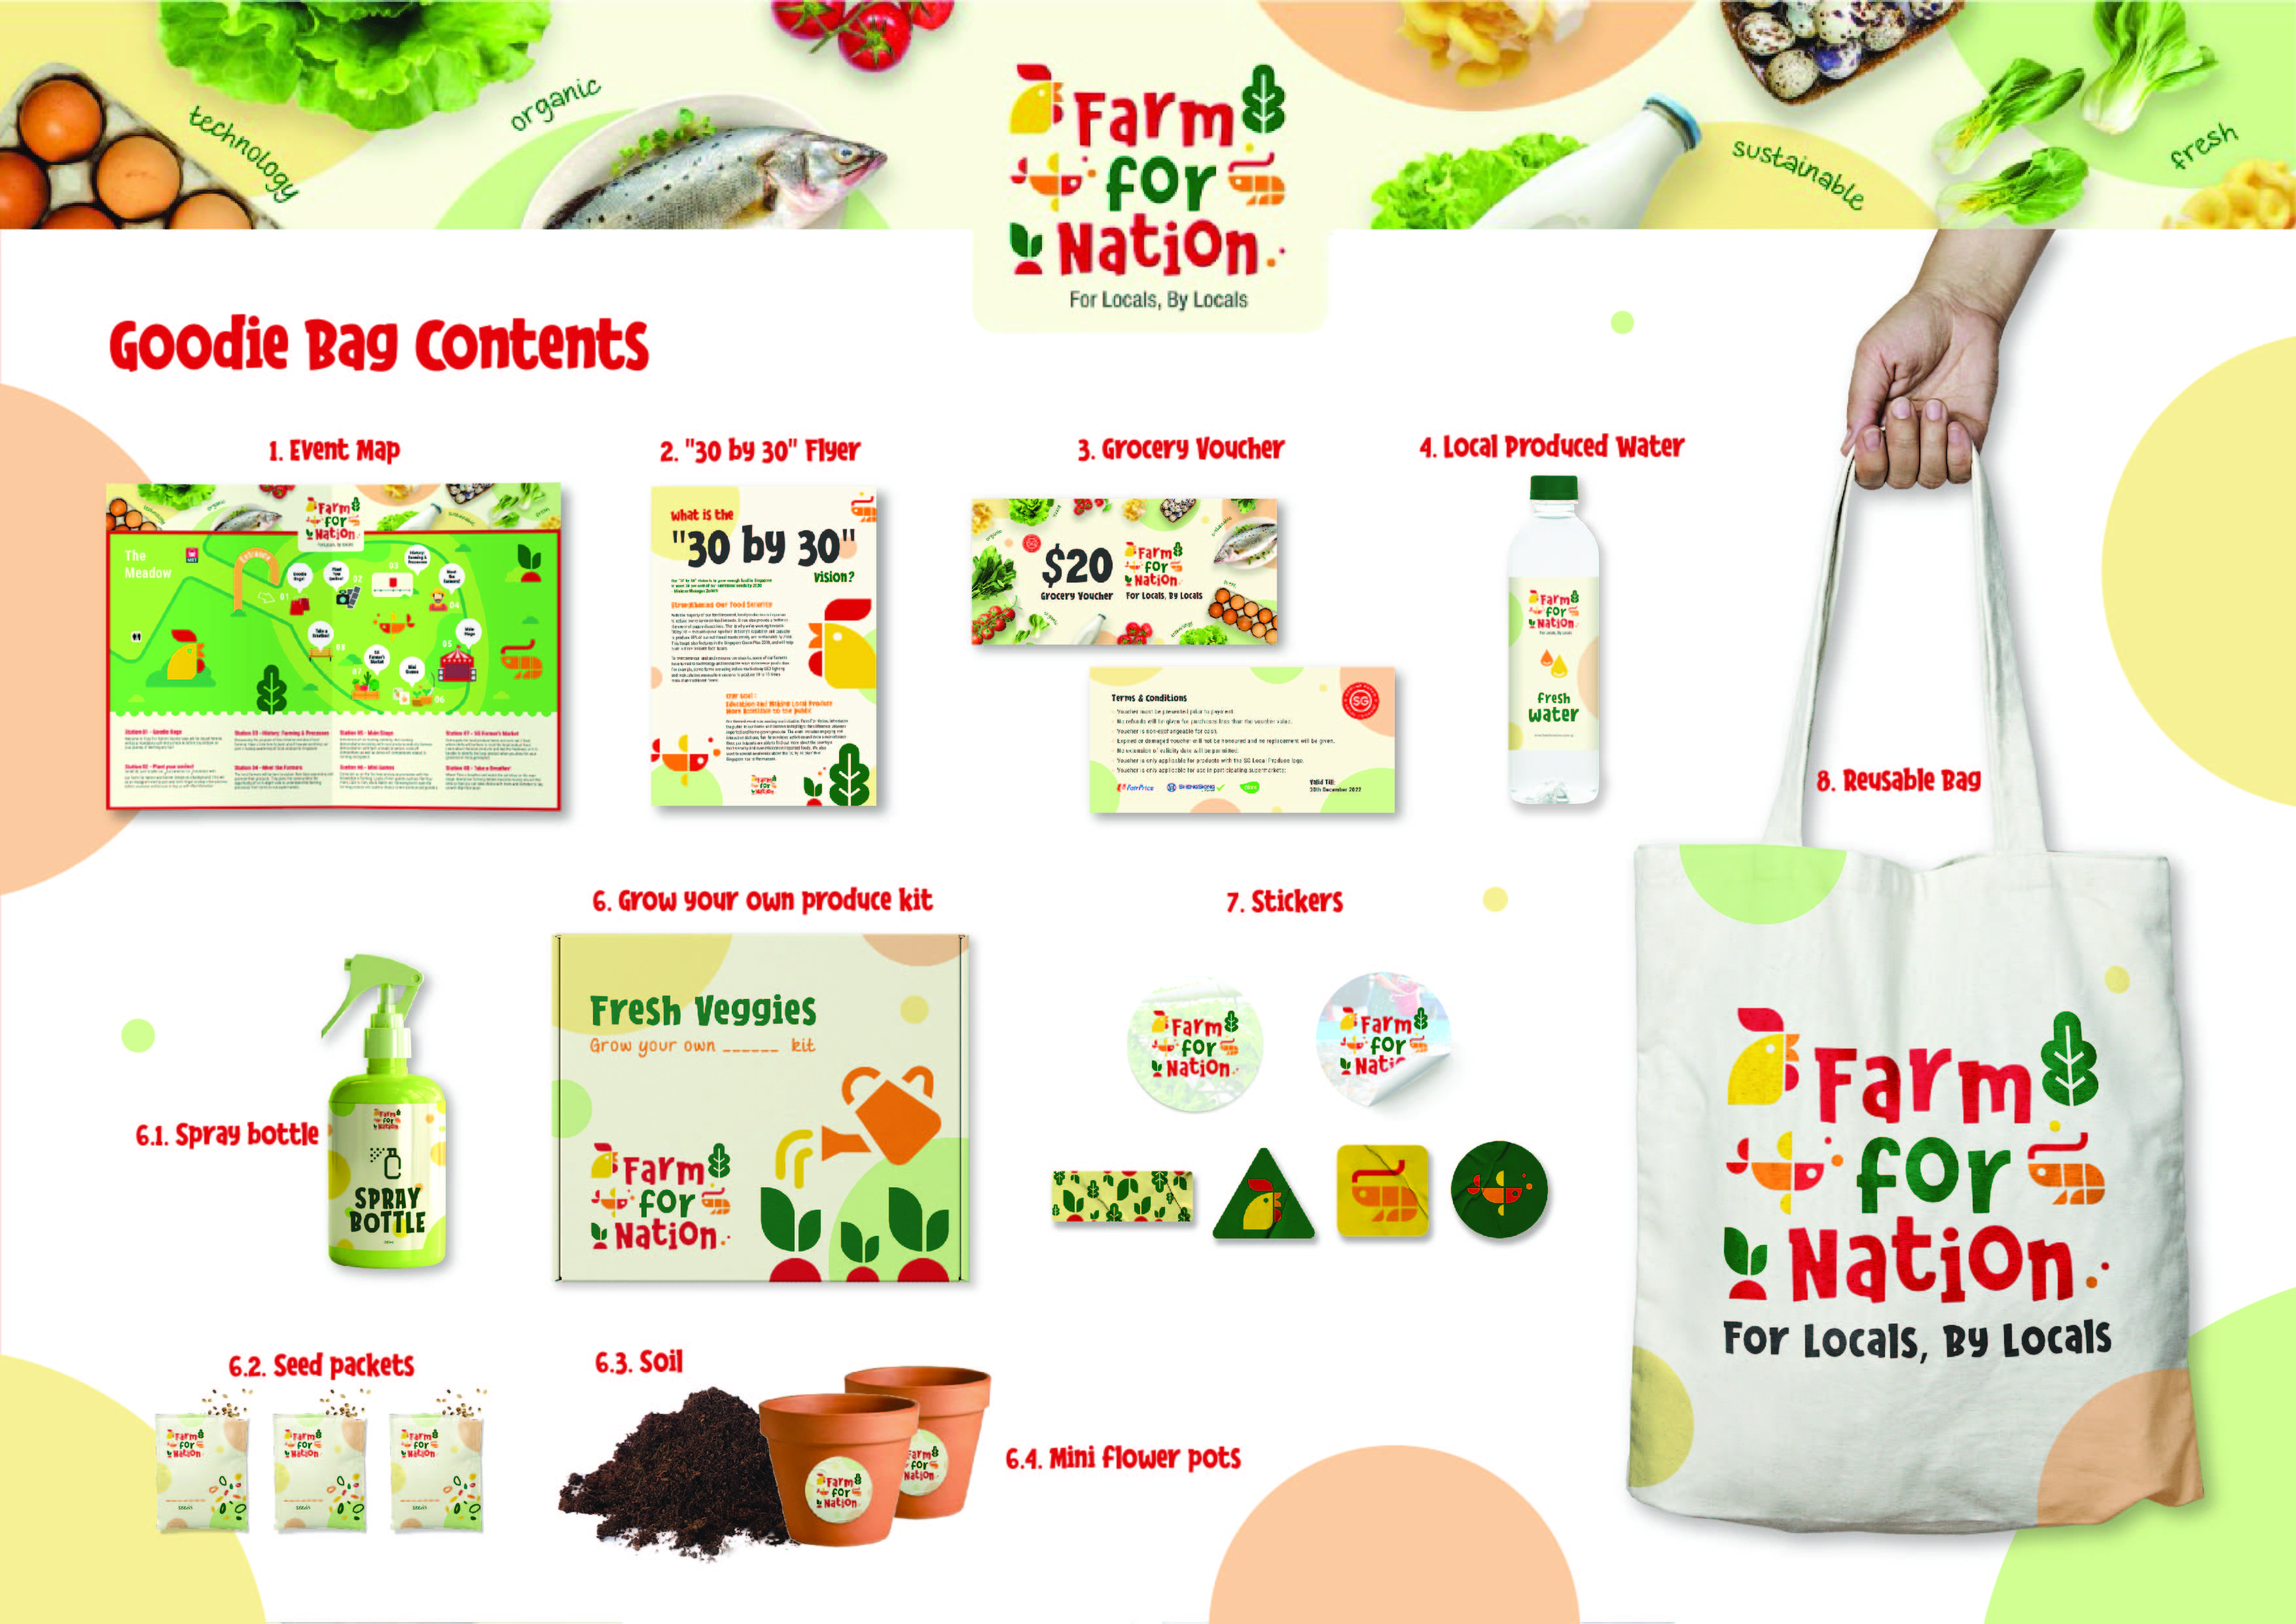 Farm For Nation – For Locals, By Locals